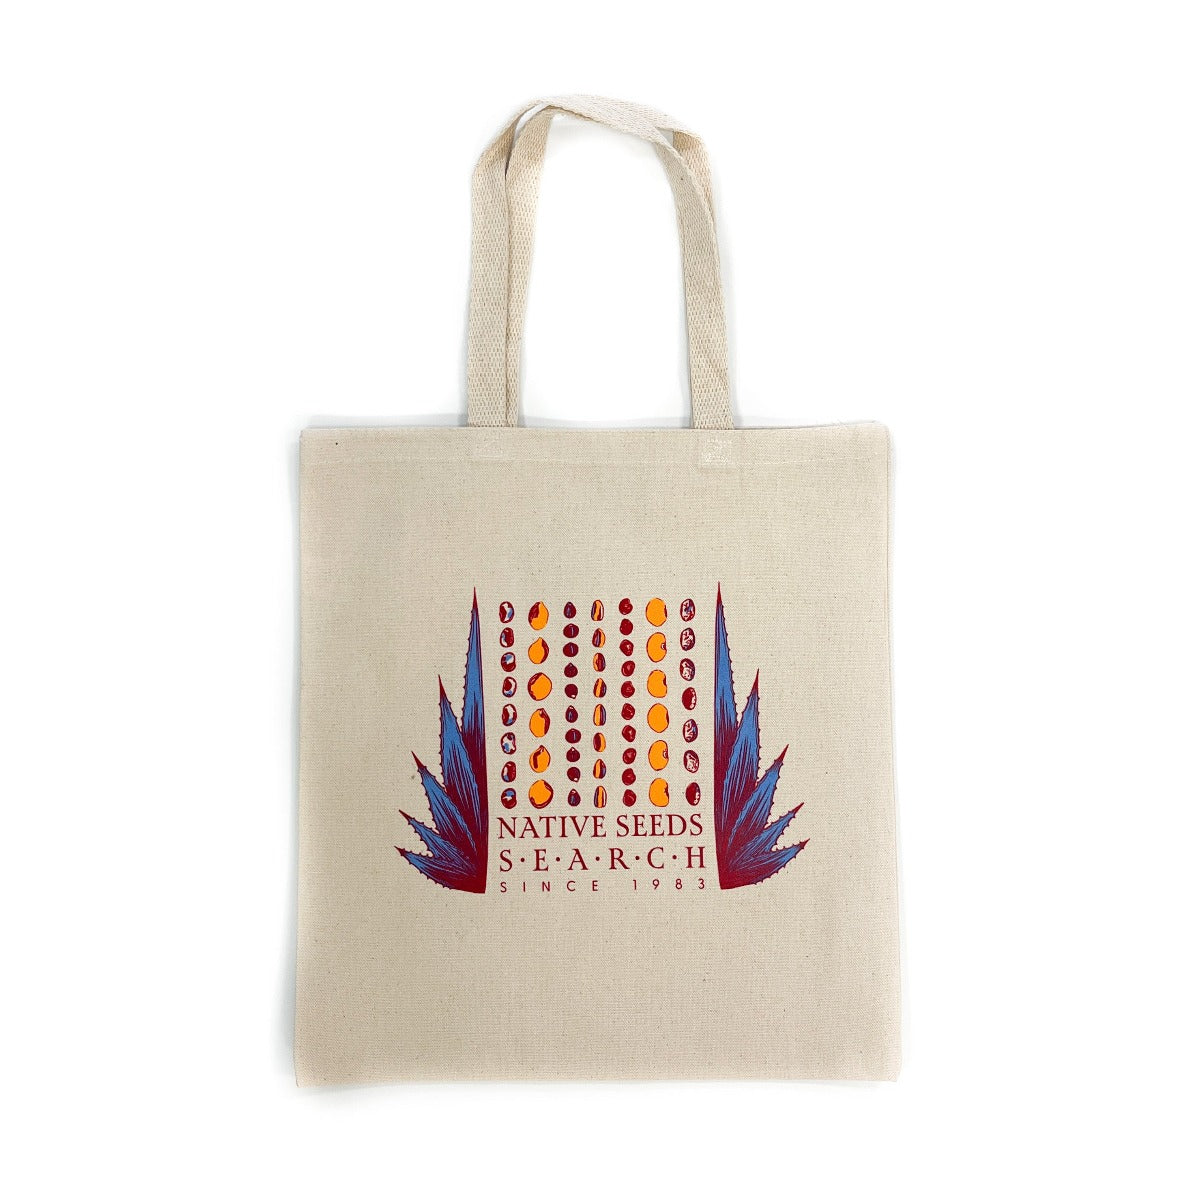 Native Seeds/SEARCH 40th Anniversary Tote Bag Limited Edition Measures 14 inches wide by 15.5 inches high  Handles are 9 inches  100% cotton canvas